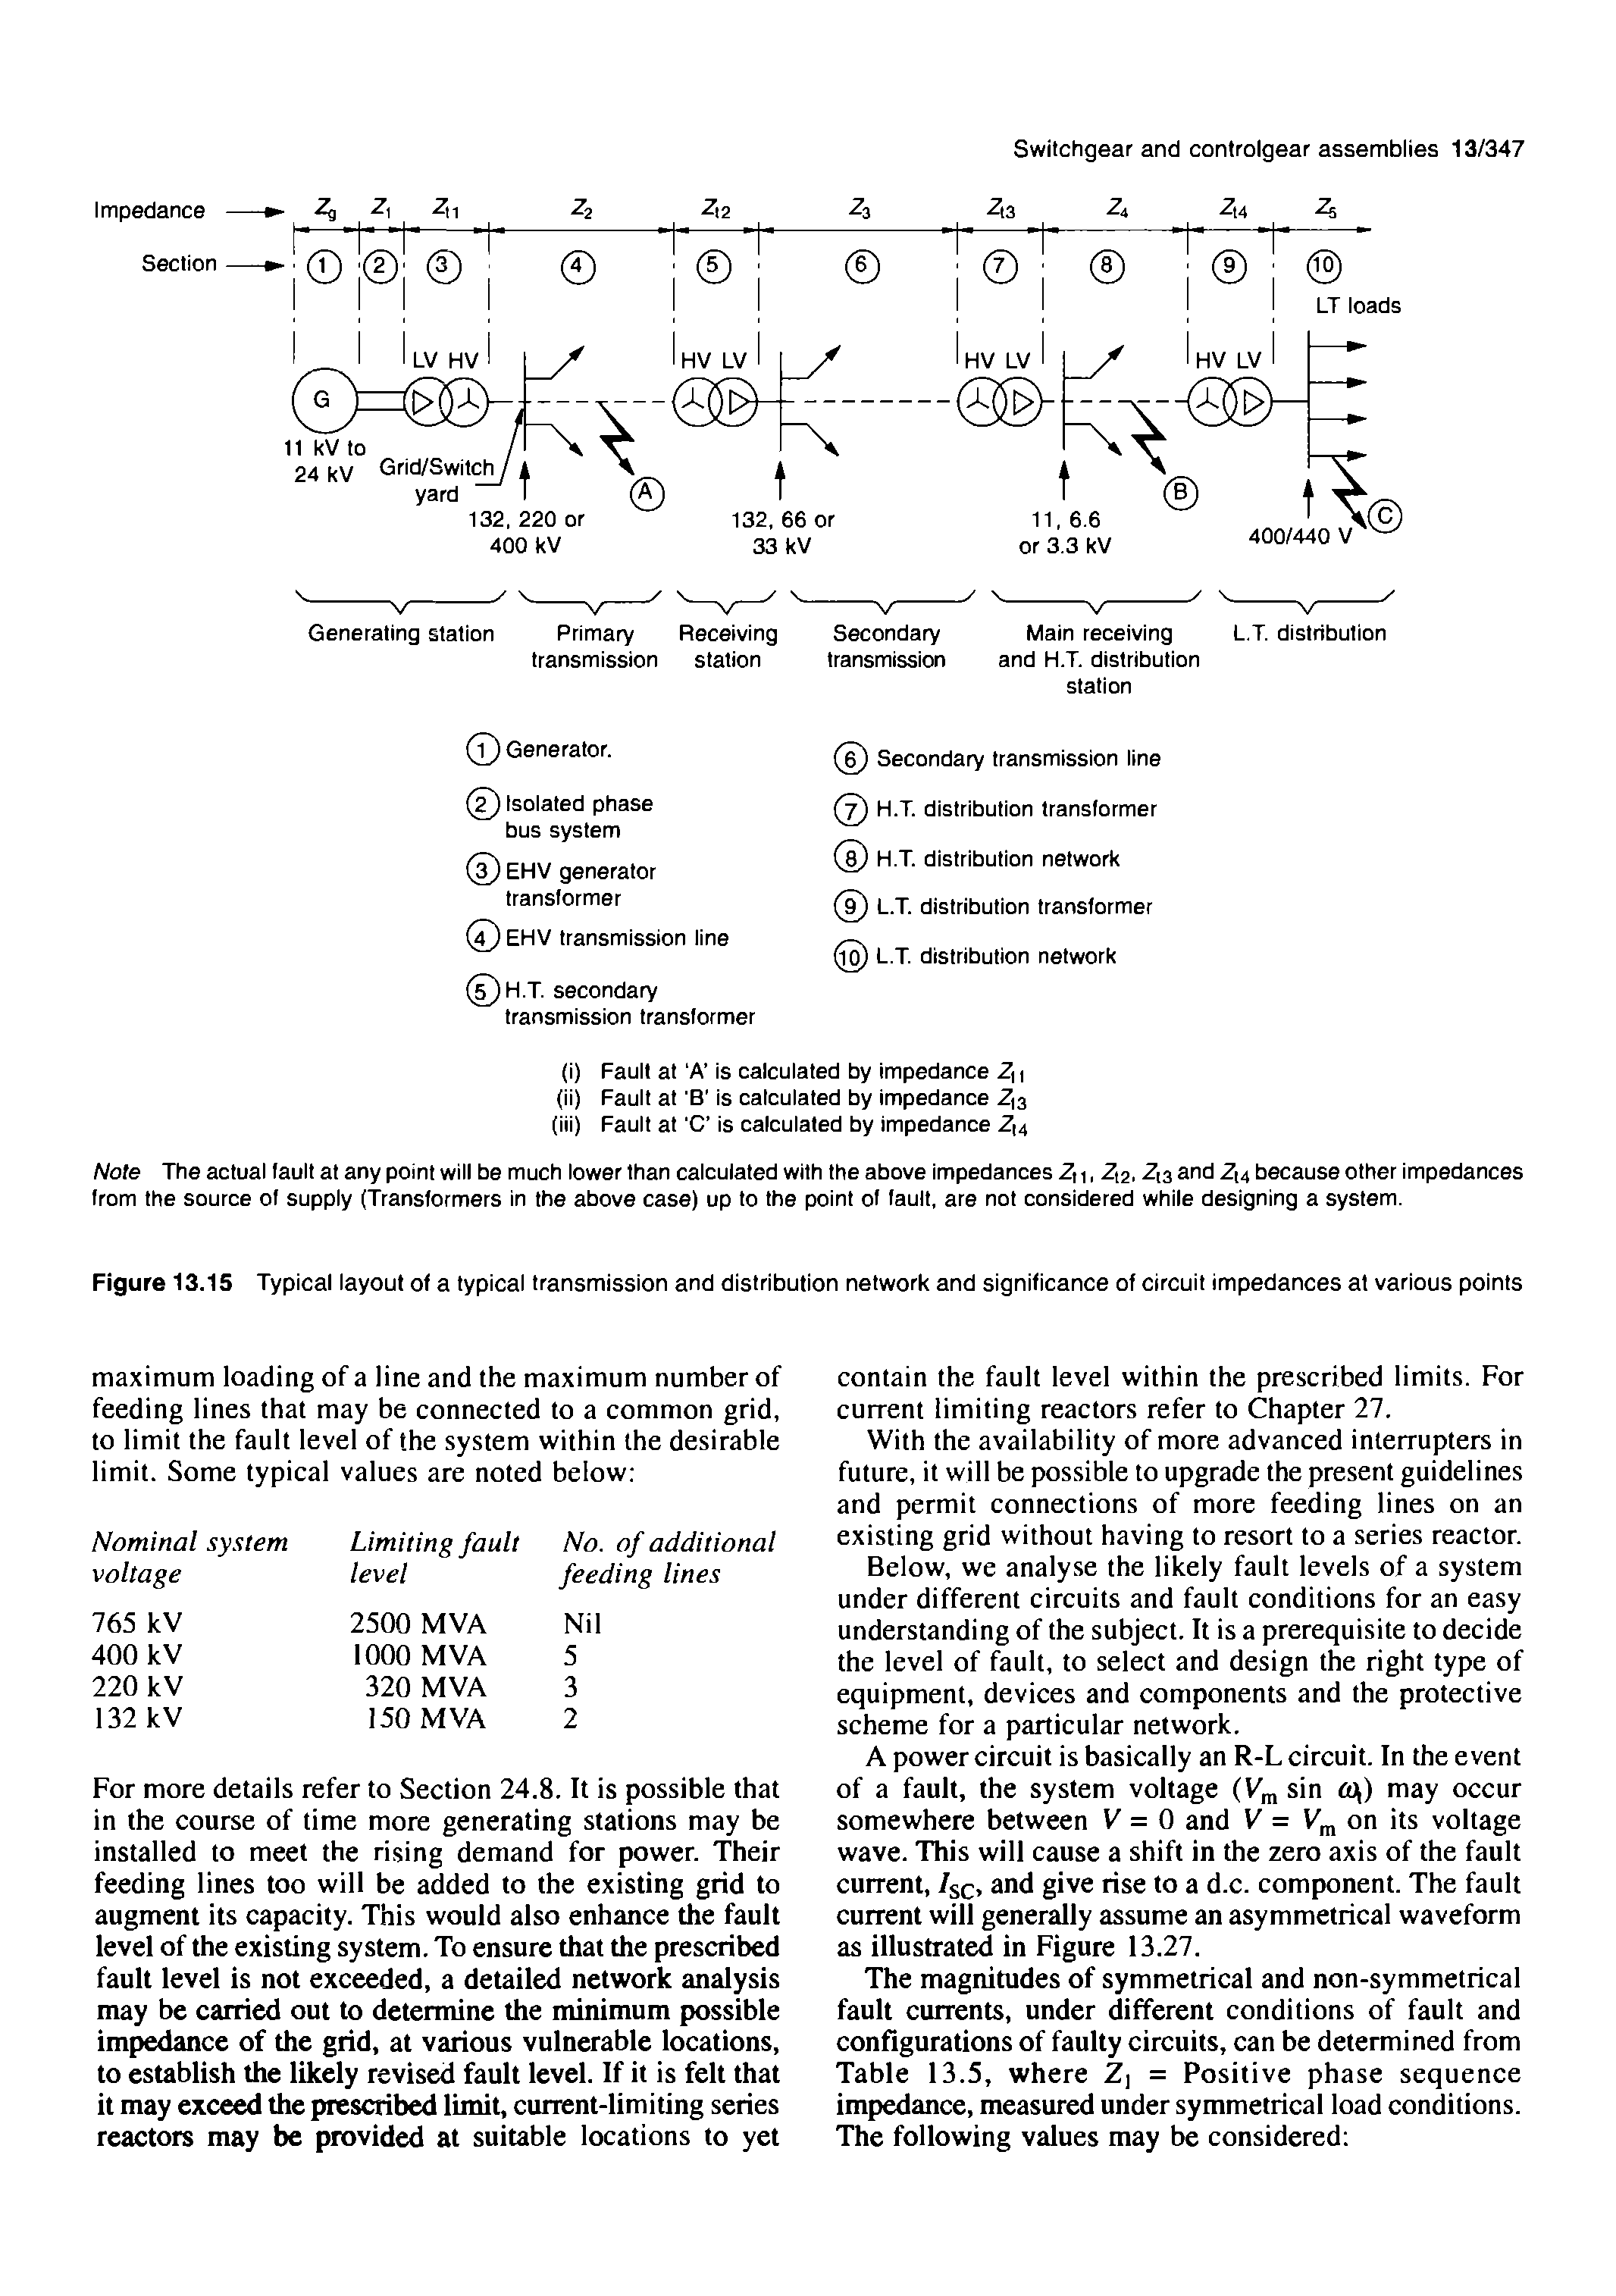 Figure 13.15 Typical layout of a typical transmission and distribution network and significance of circuit impedances at various points...